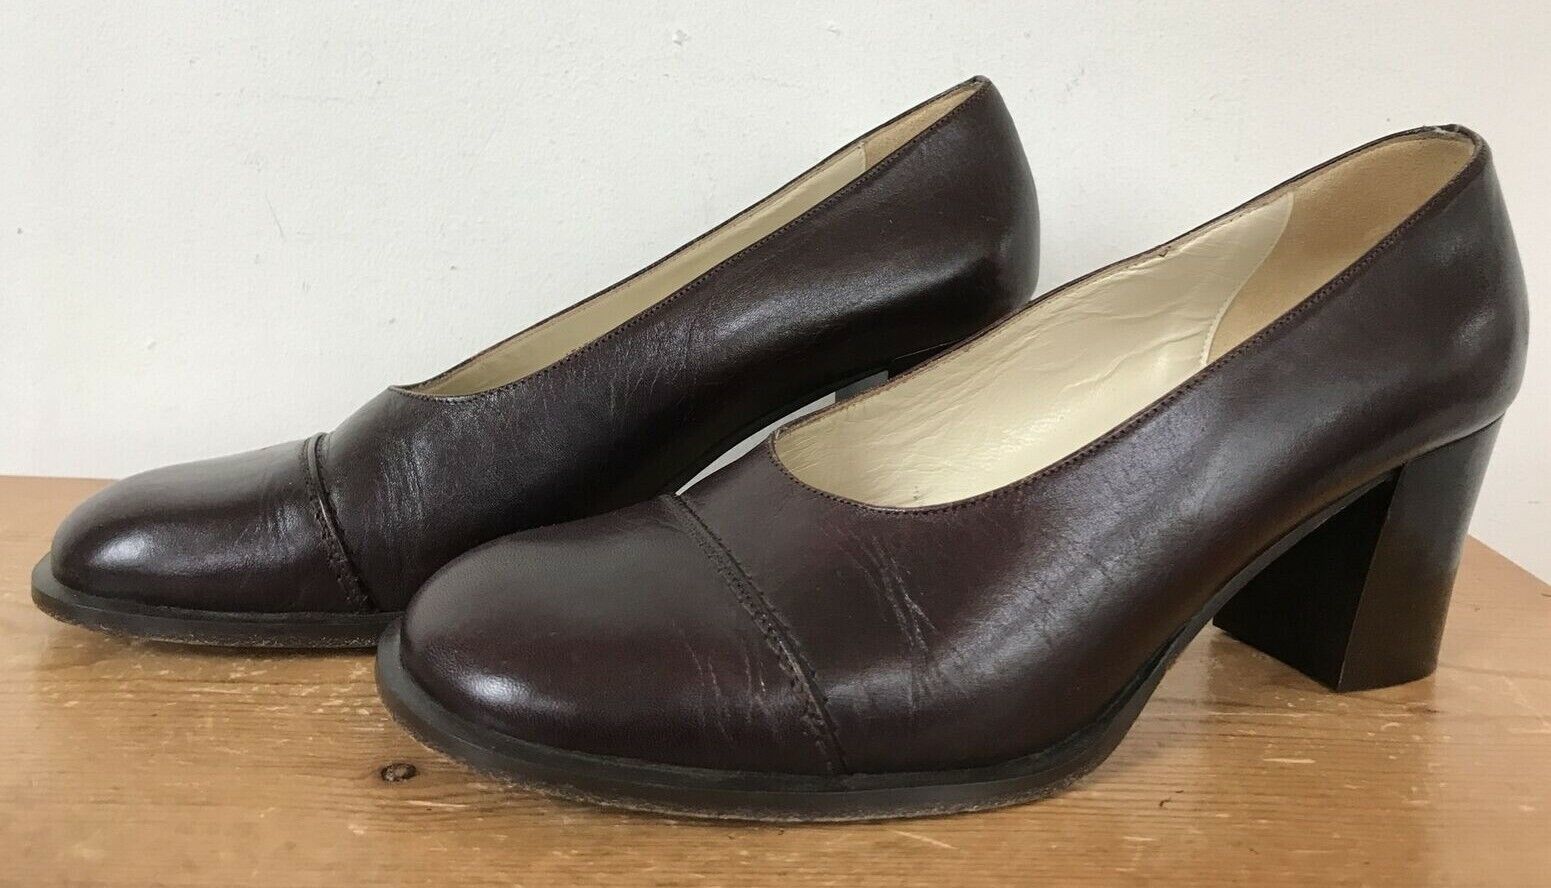 Primary image for J Crew Italy Brown Leather Chunky Block High Heel Round Cap Toe Pumps 8.5 39